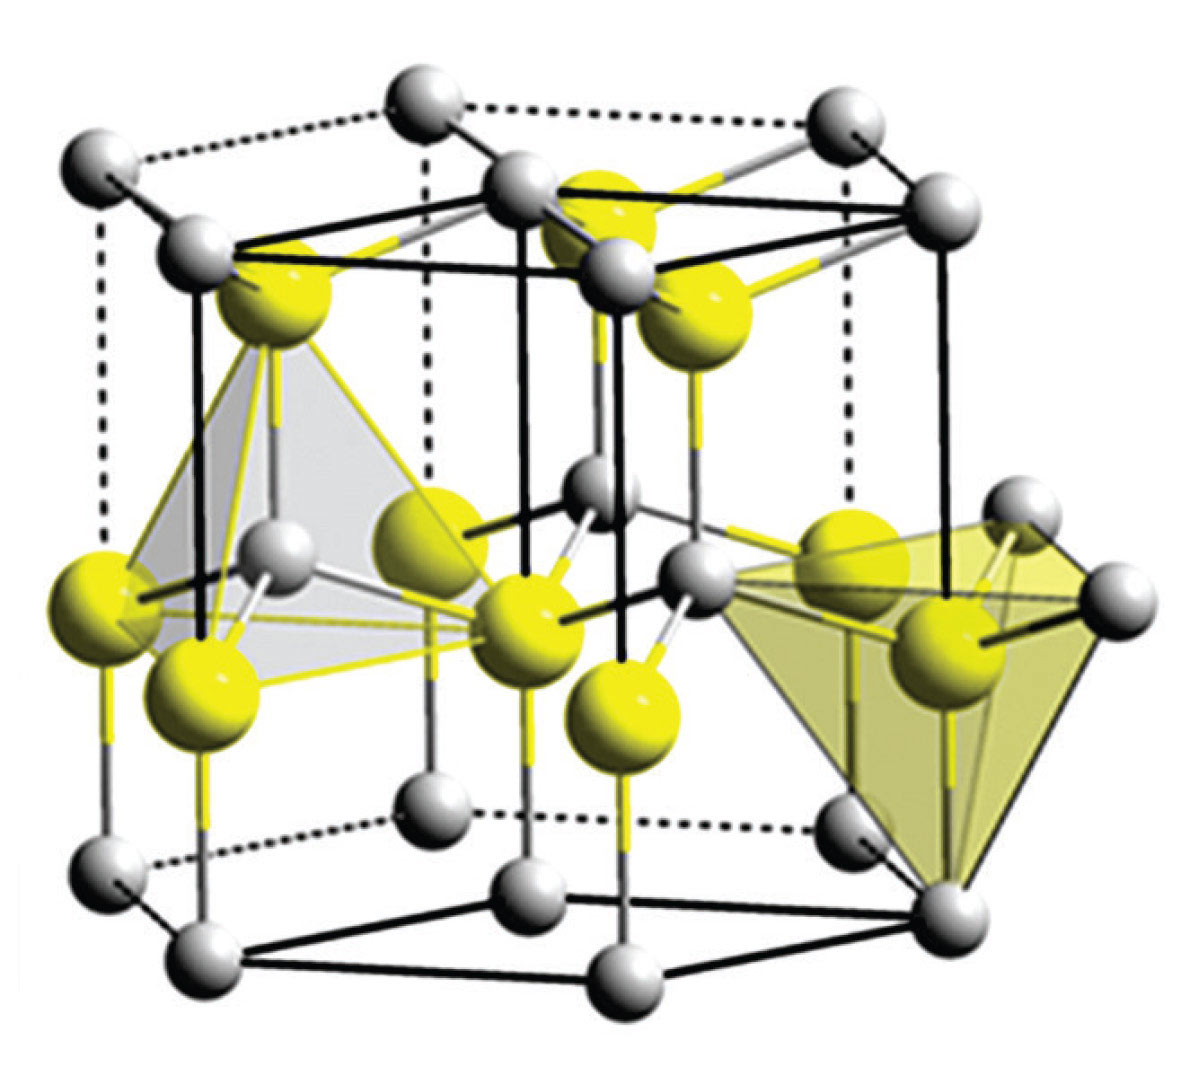 Figure 1: Wurtzite structure. The large balls represent Zn and the smaller balls represent oxygen.